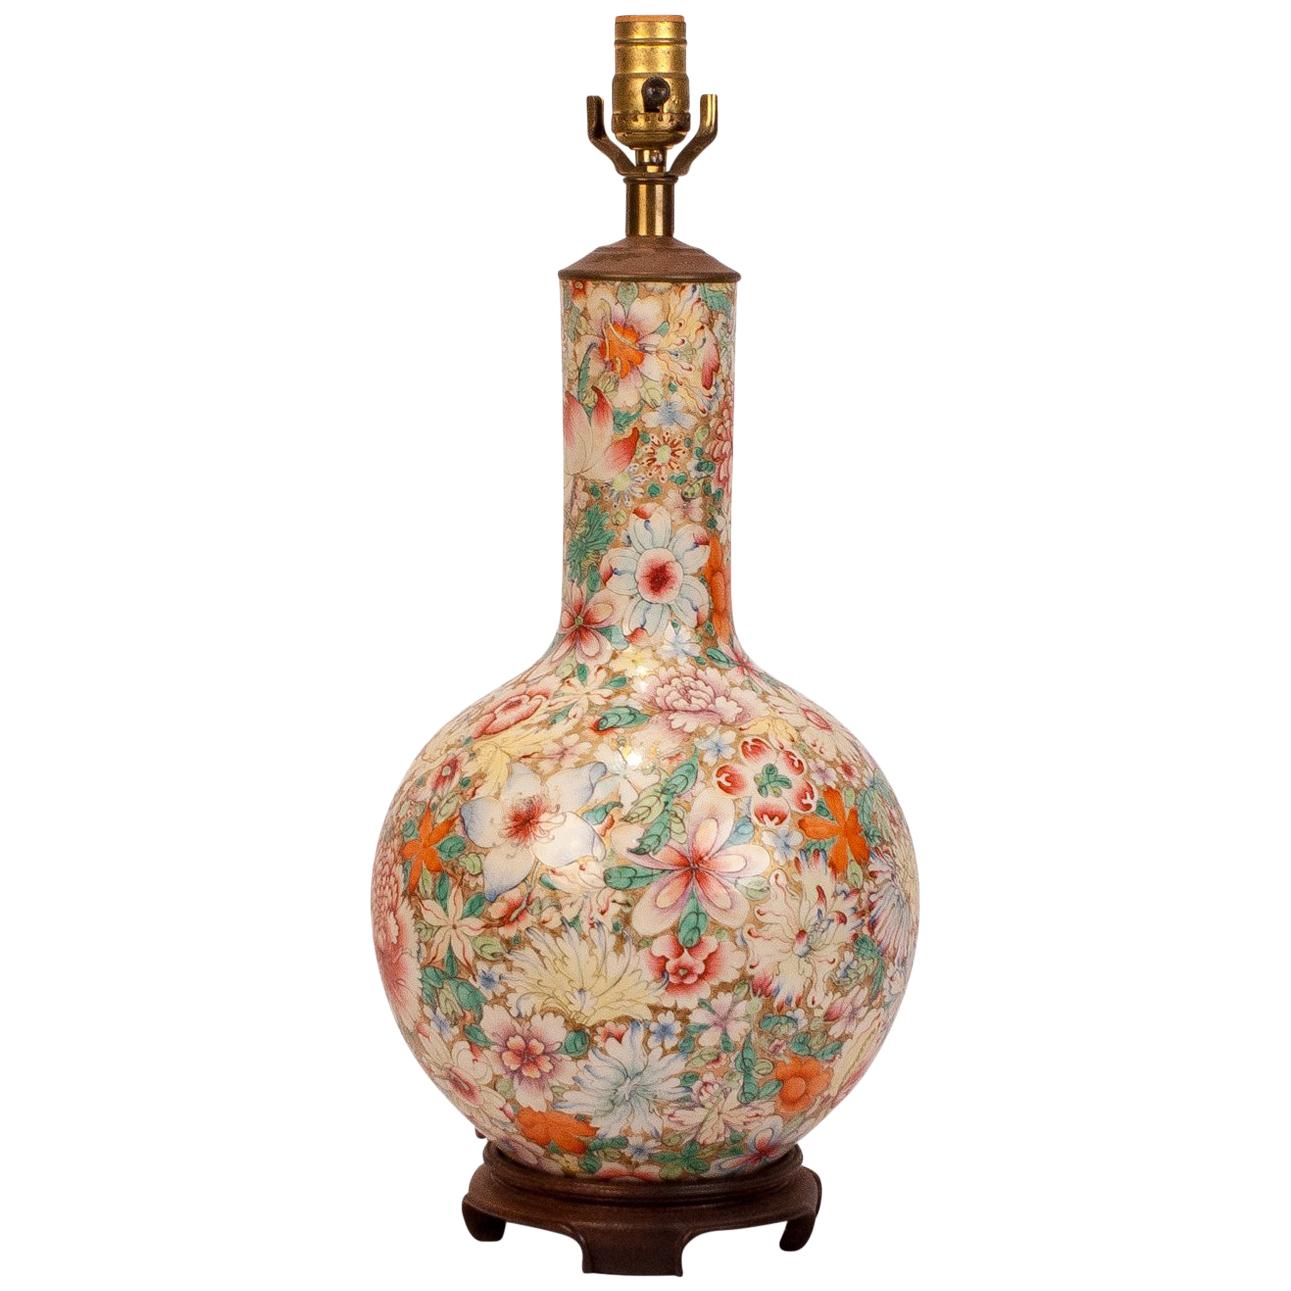 "Mille Fleur" Vase Later Mounted as a Lamp, China, circa 1870